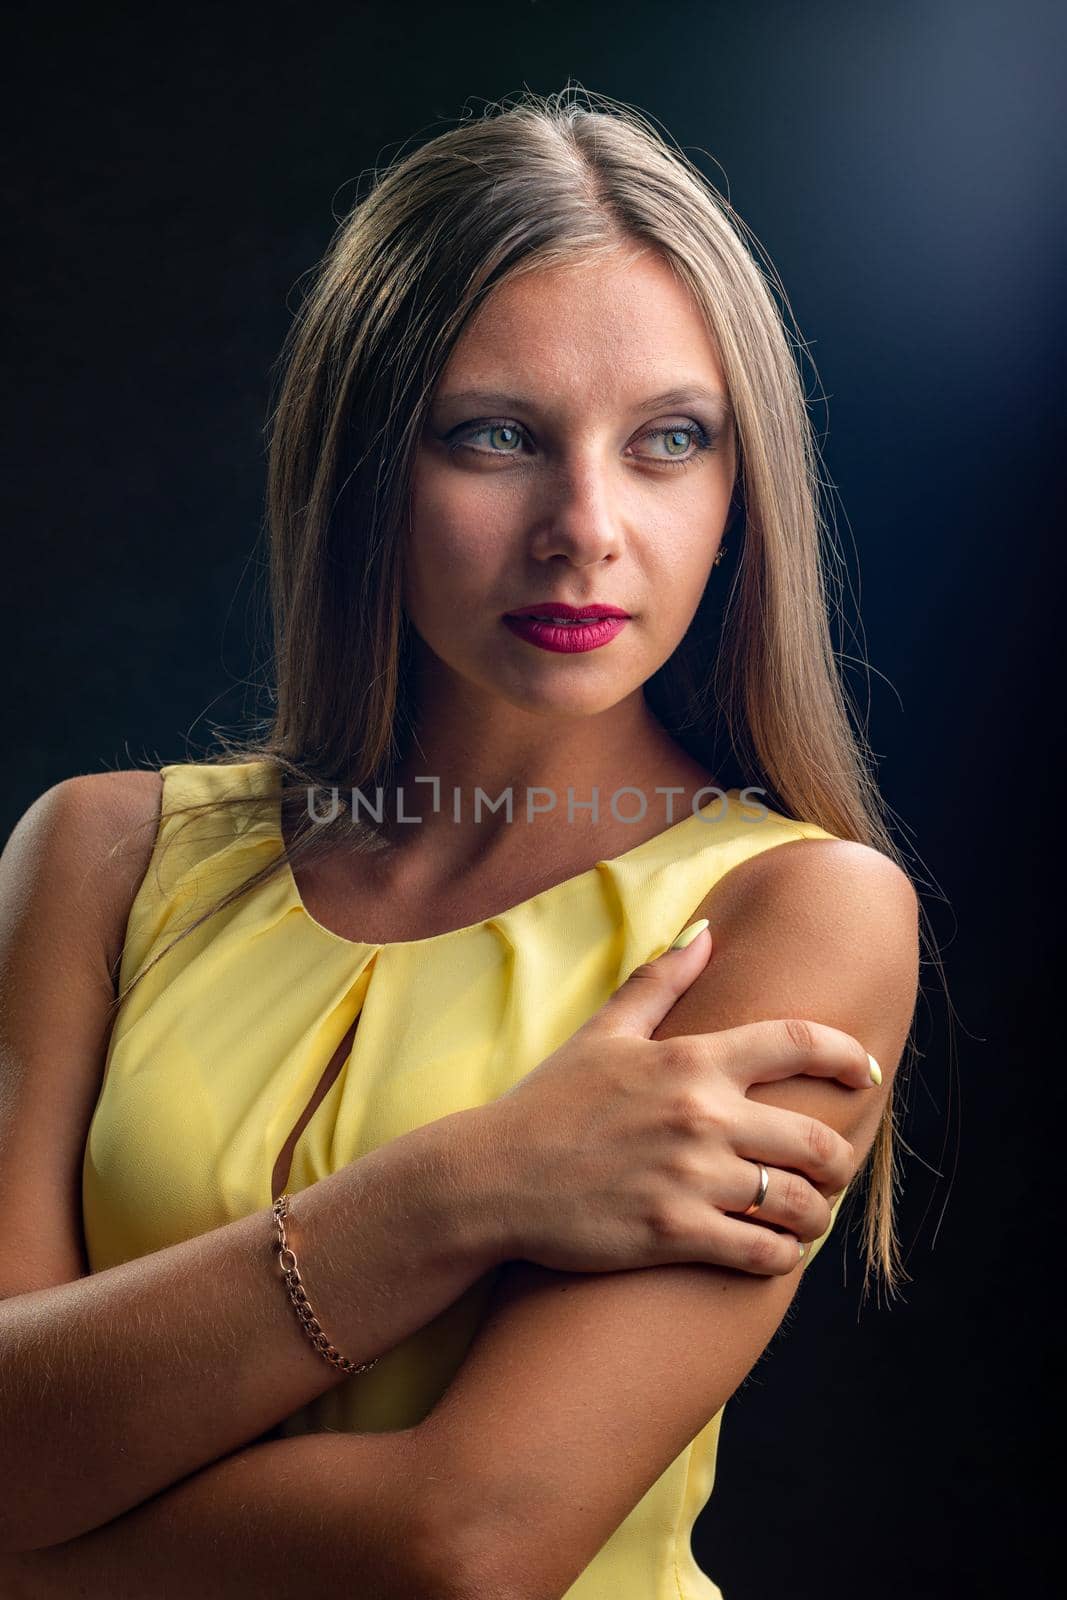 Portrait of a beautiful girl in a yellow dress on a black background by Madhourse